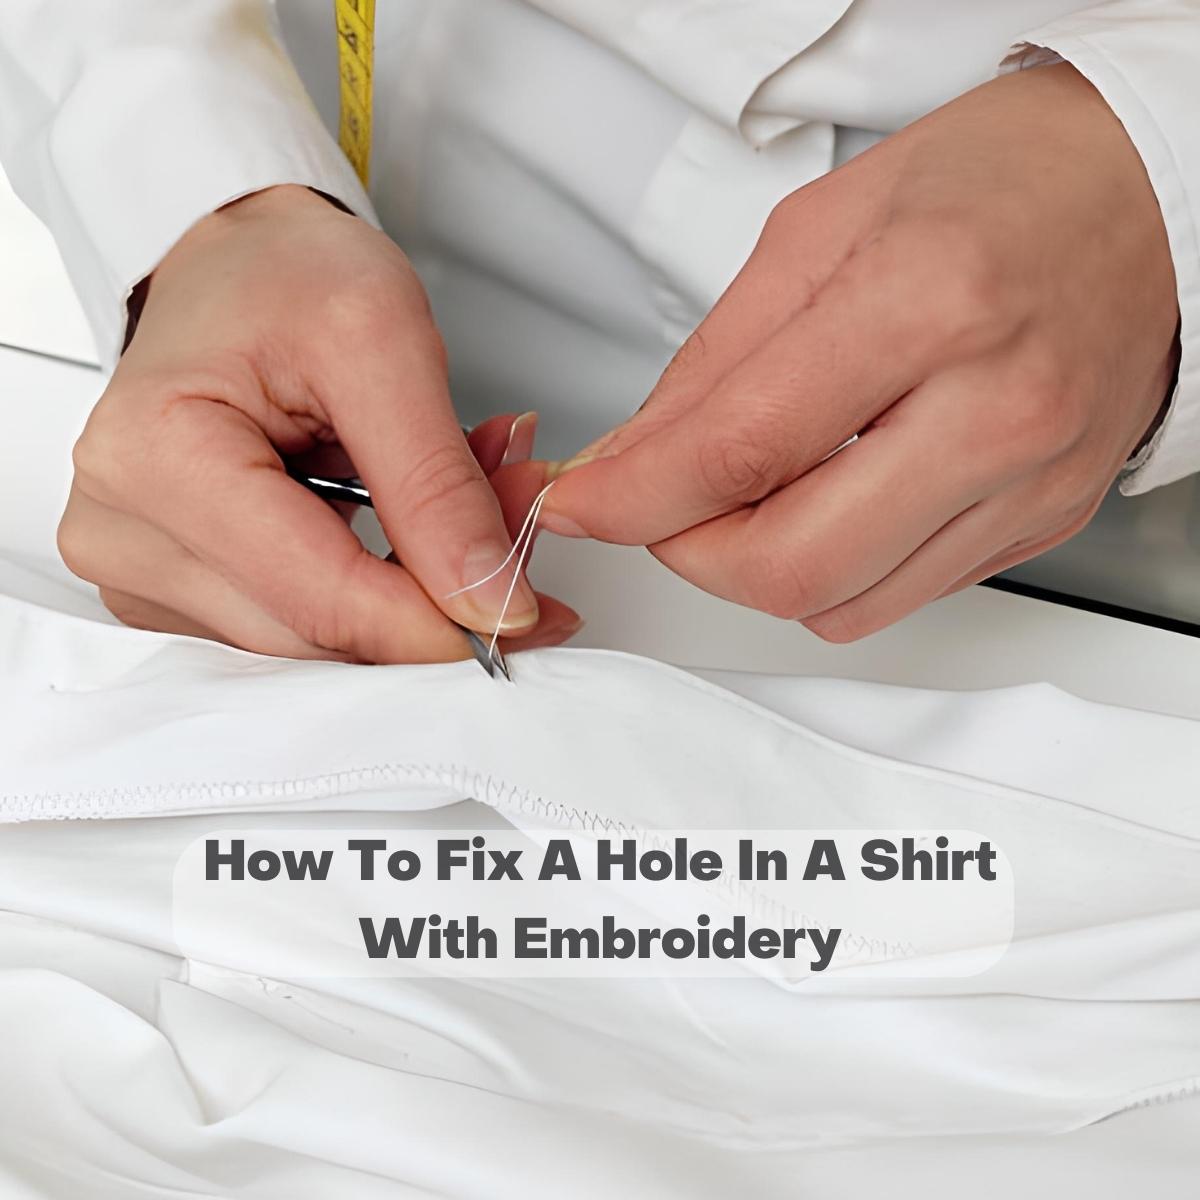 How To Fix A Hole In A Shirt With Embroidery